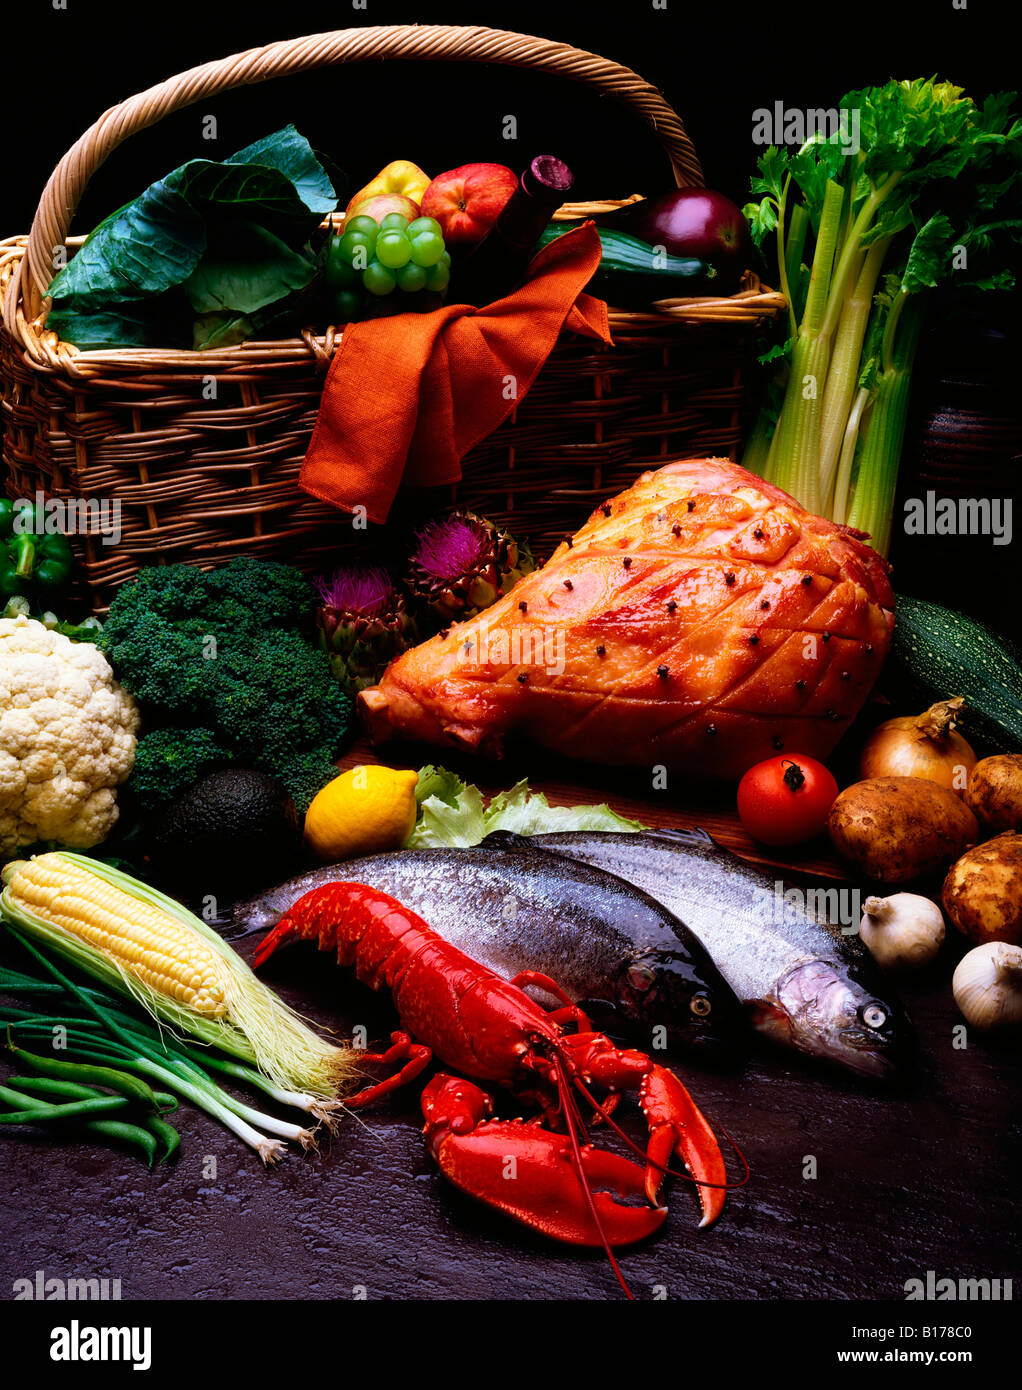 Ham, fish and vegetables Stock Photo